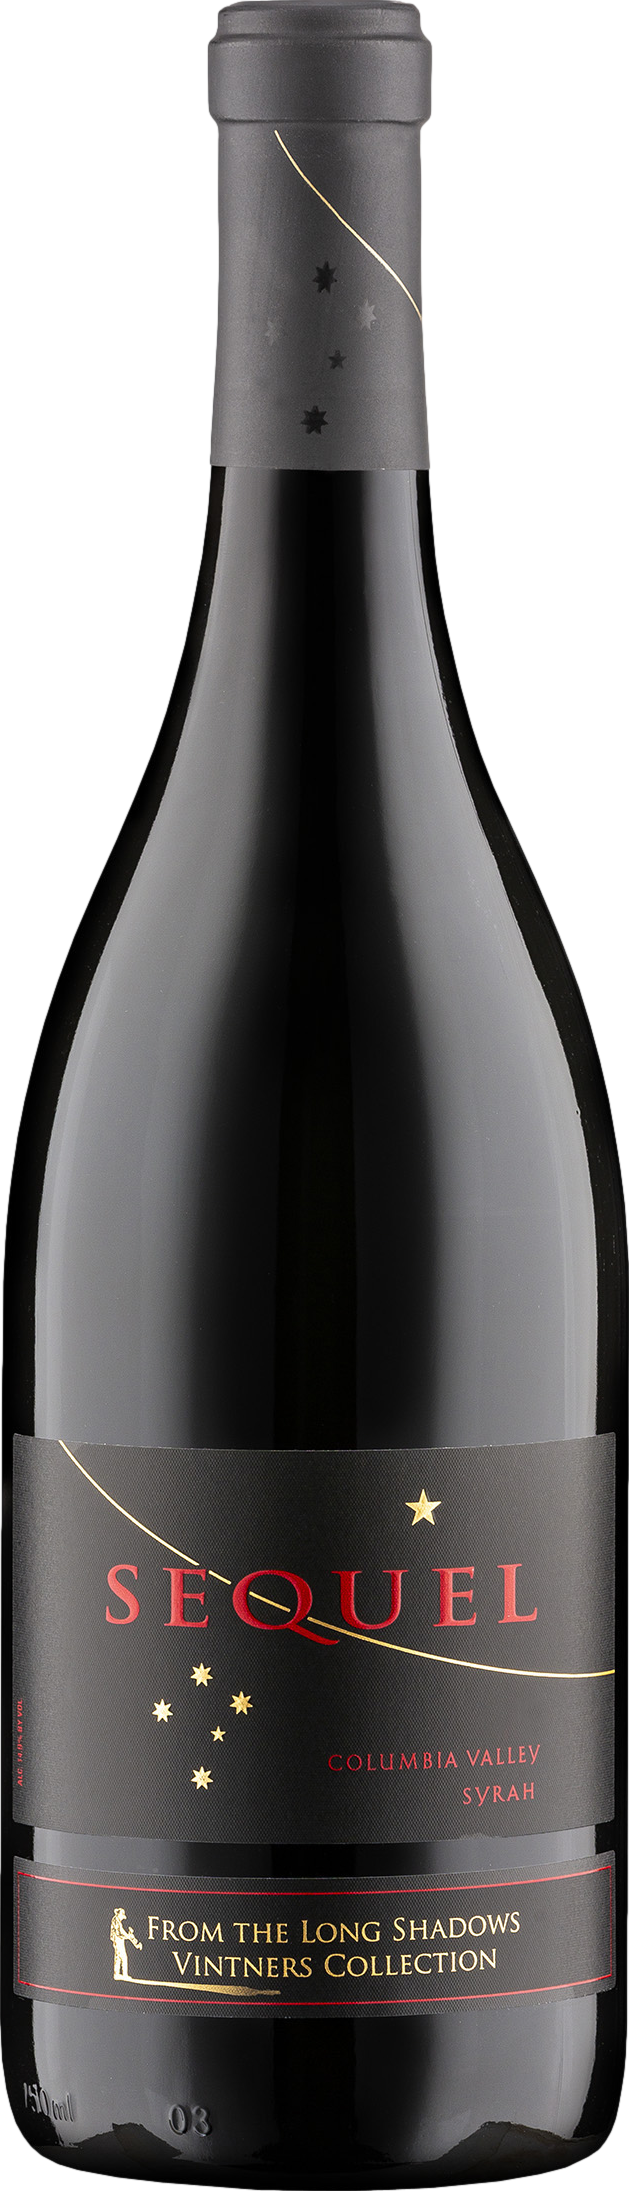 Product image of Long Shadows Sequel Syrah 2017 from 8wines